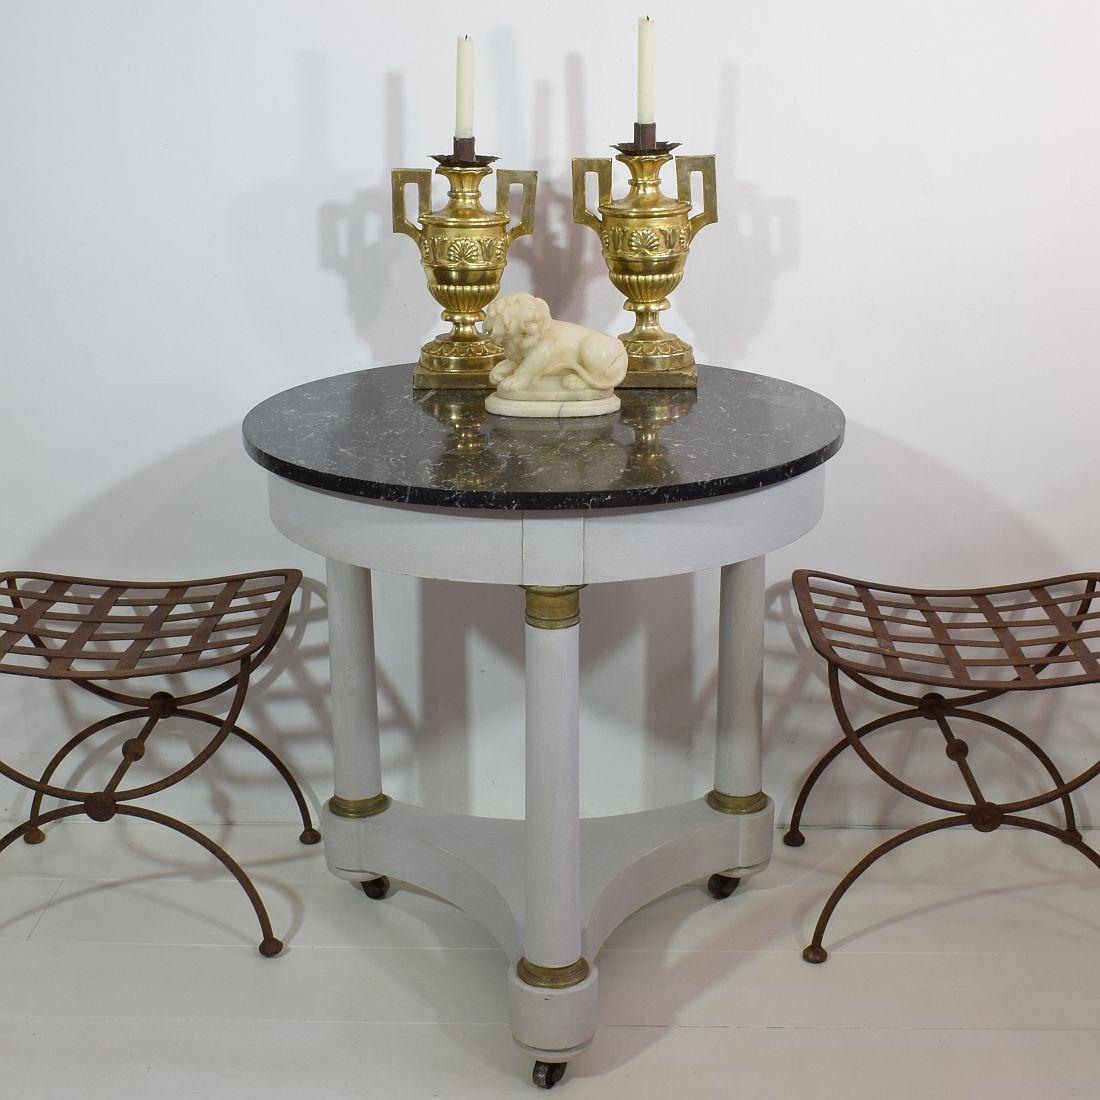 Beautiful Empire style table with it's black marble top and its typical French grey color, 
France, circa 1850-1900. Weathered and paint of later date.